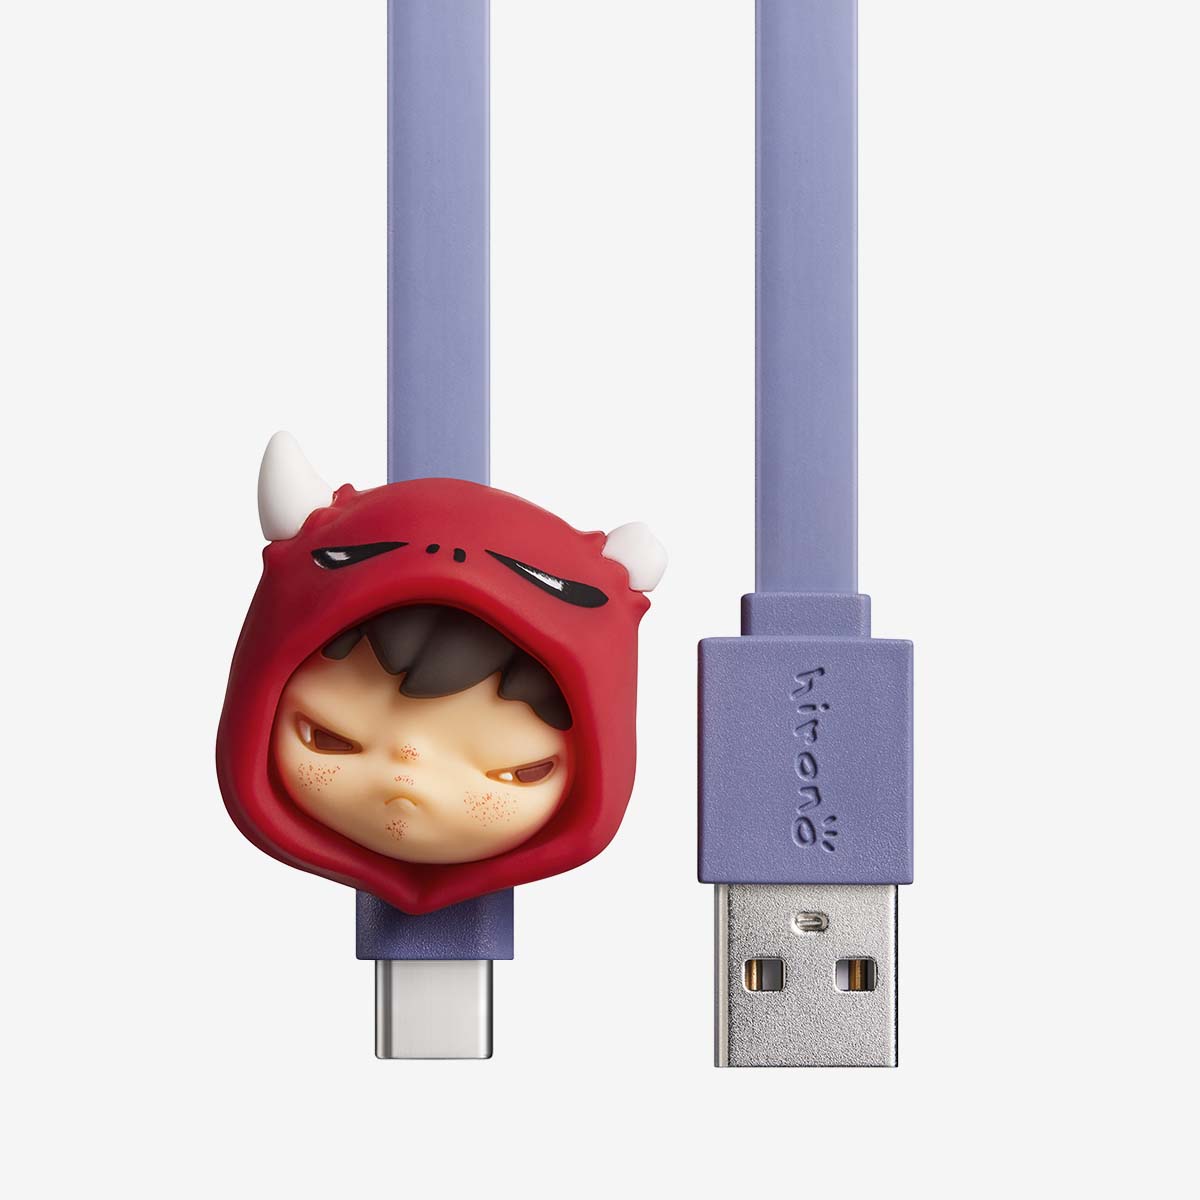 【New】Pop Mart HIRONO Mime Series Cable Blind Box (Type C-USB)